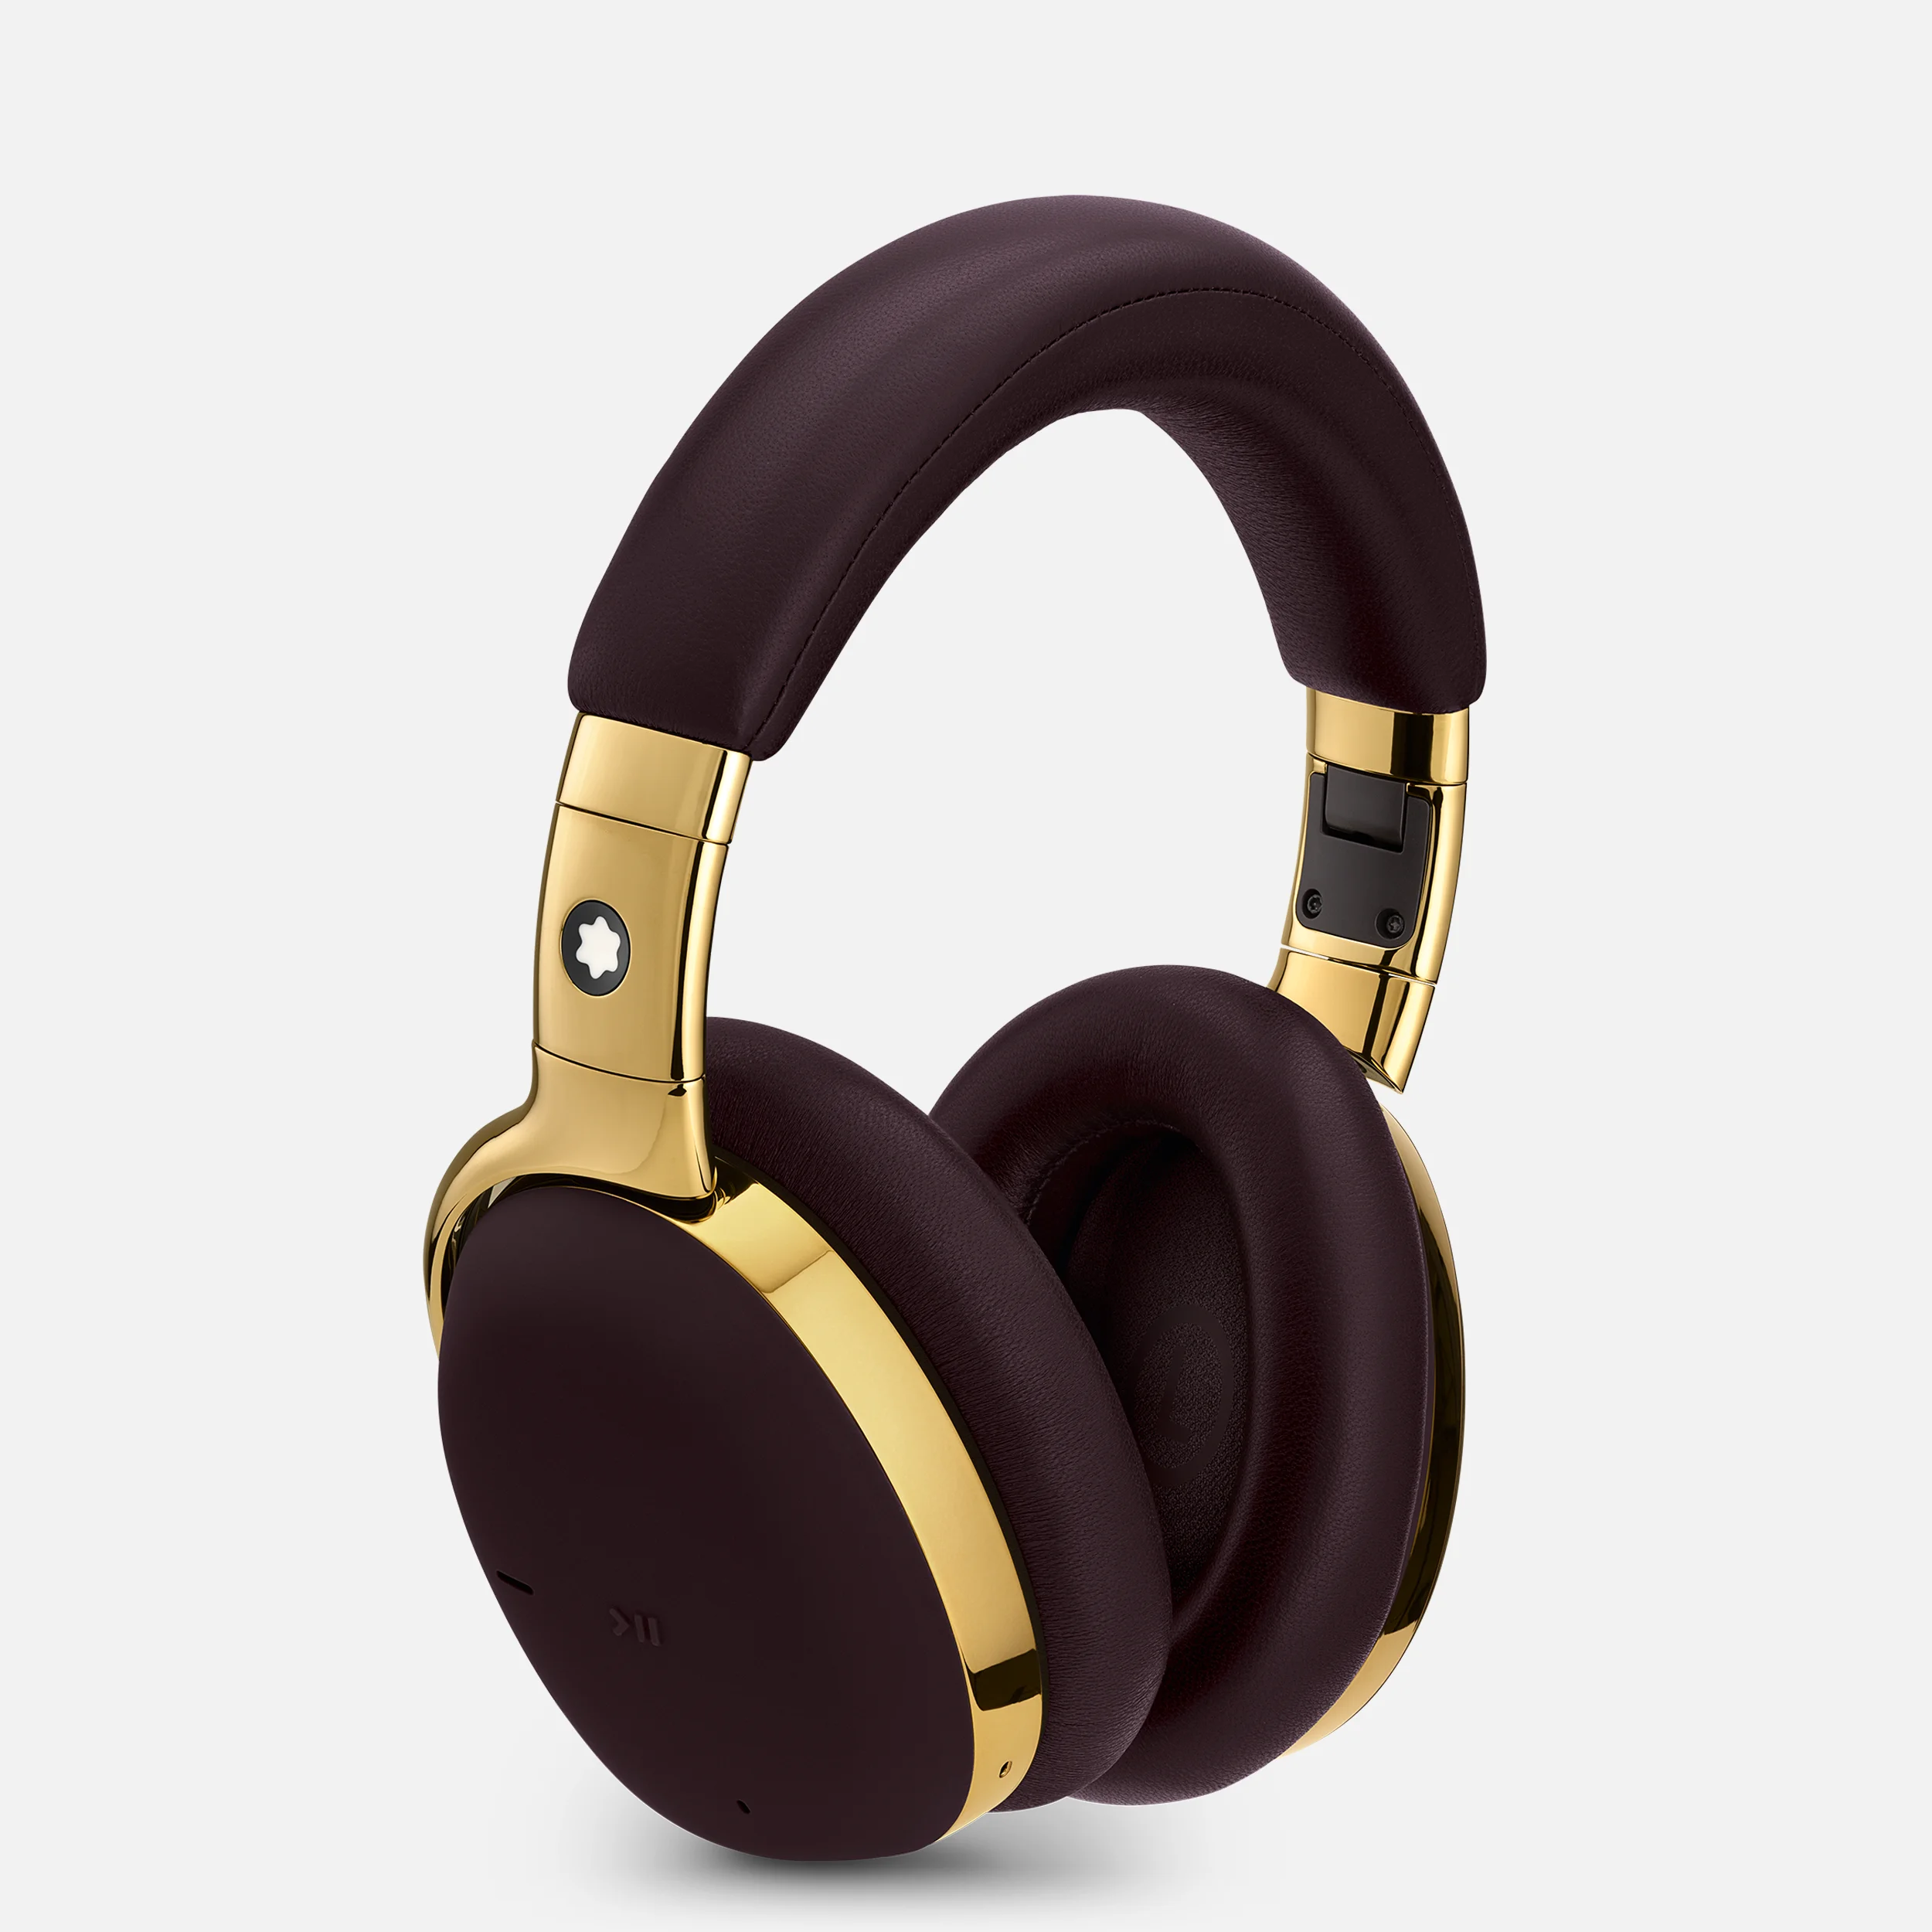 Noise Cancelling Headphones - Buy Noise Cancelling Headphones online at  Best Prices in India